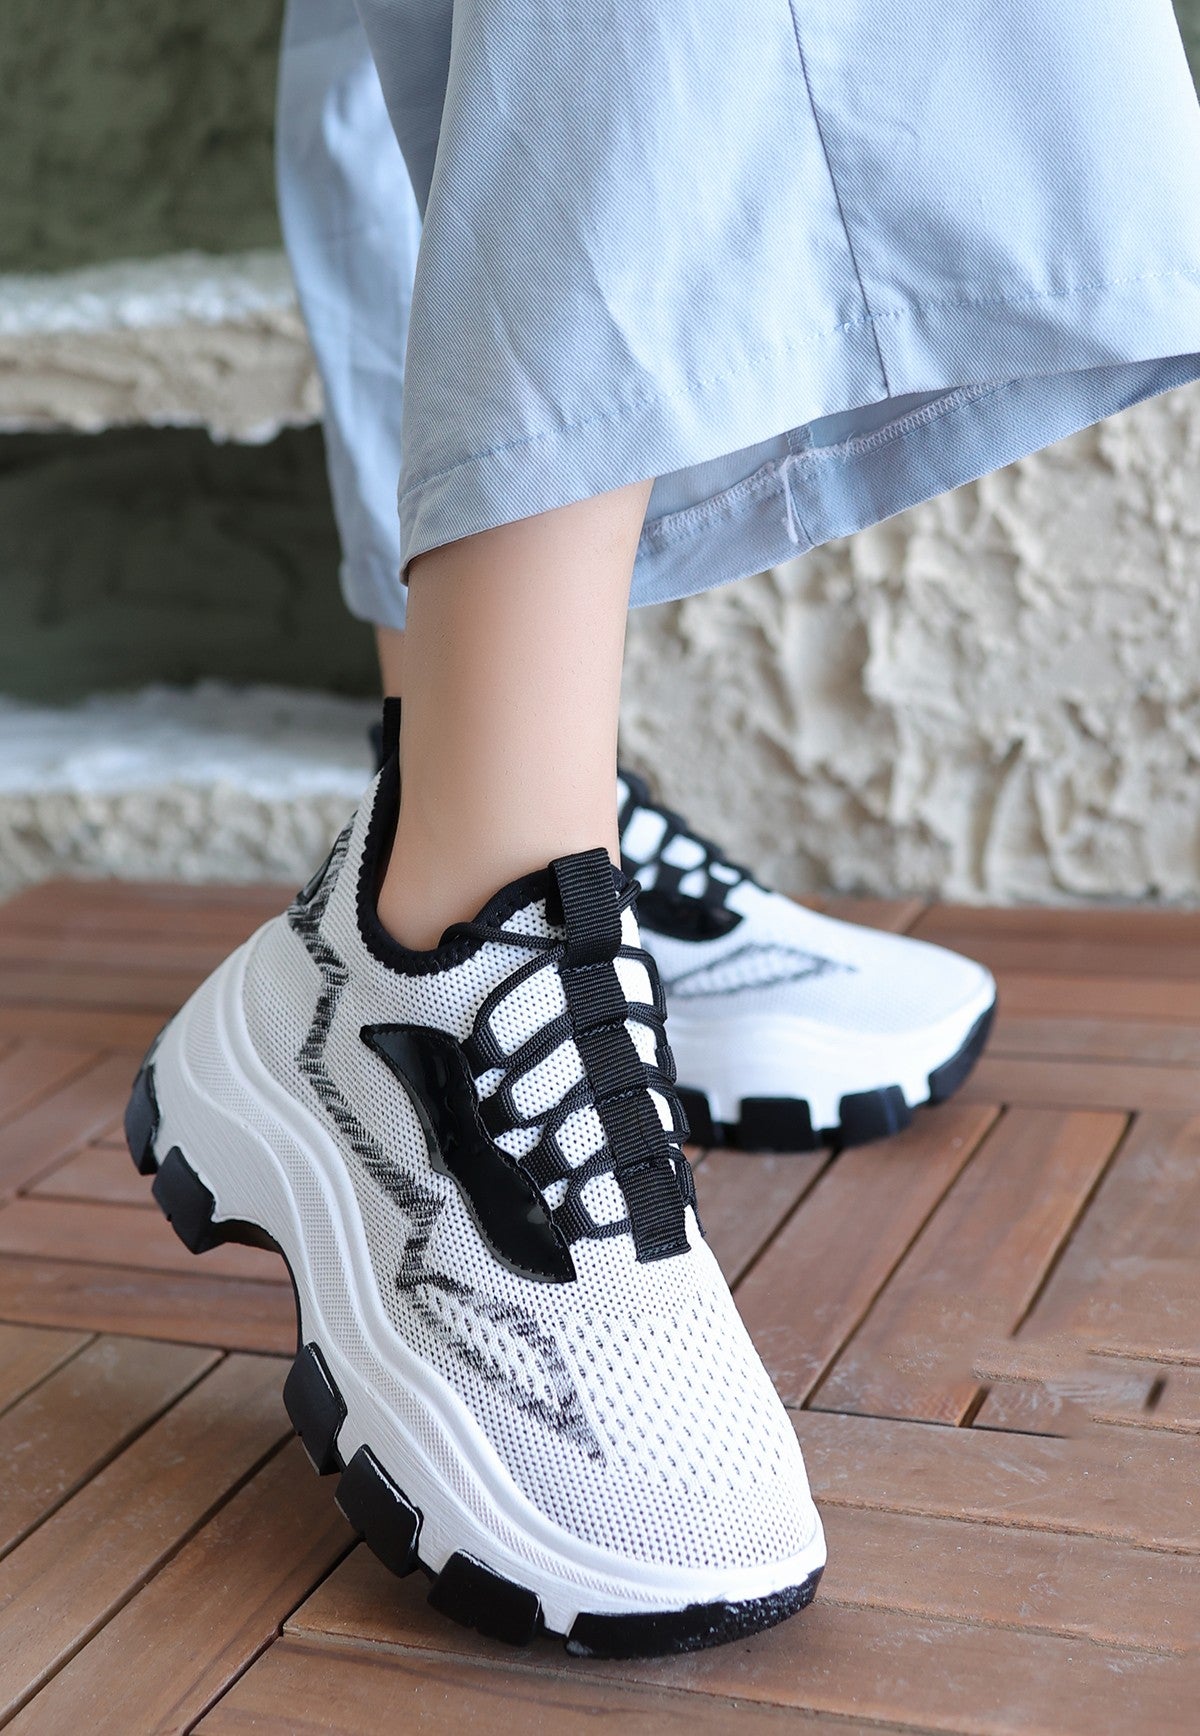 Women's White Knitwear Lace-Up Sports Shoes - STREETMODE™